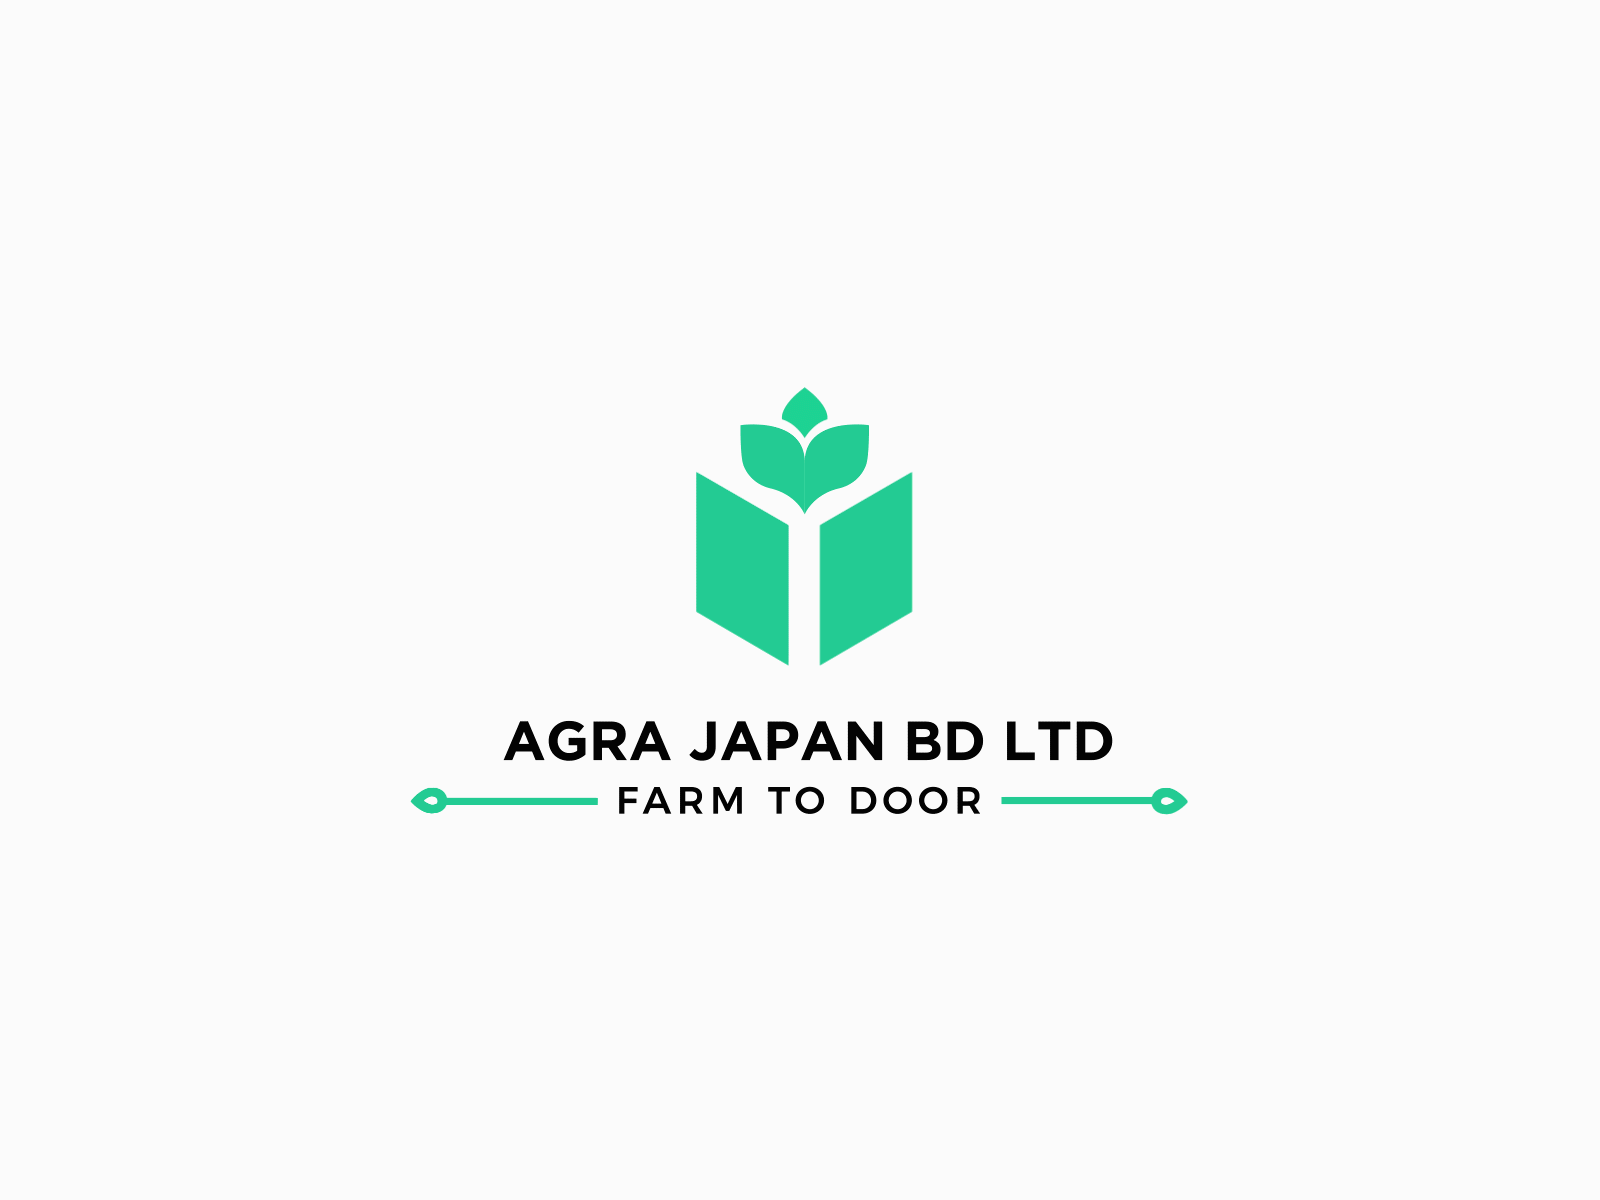 CON AGRA FOODS 1 Logo PNG Transparent & SVG Vector - Freebie Supply